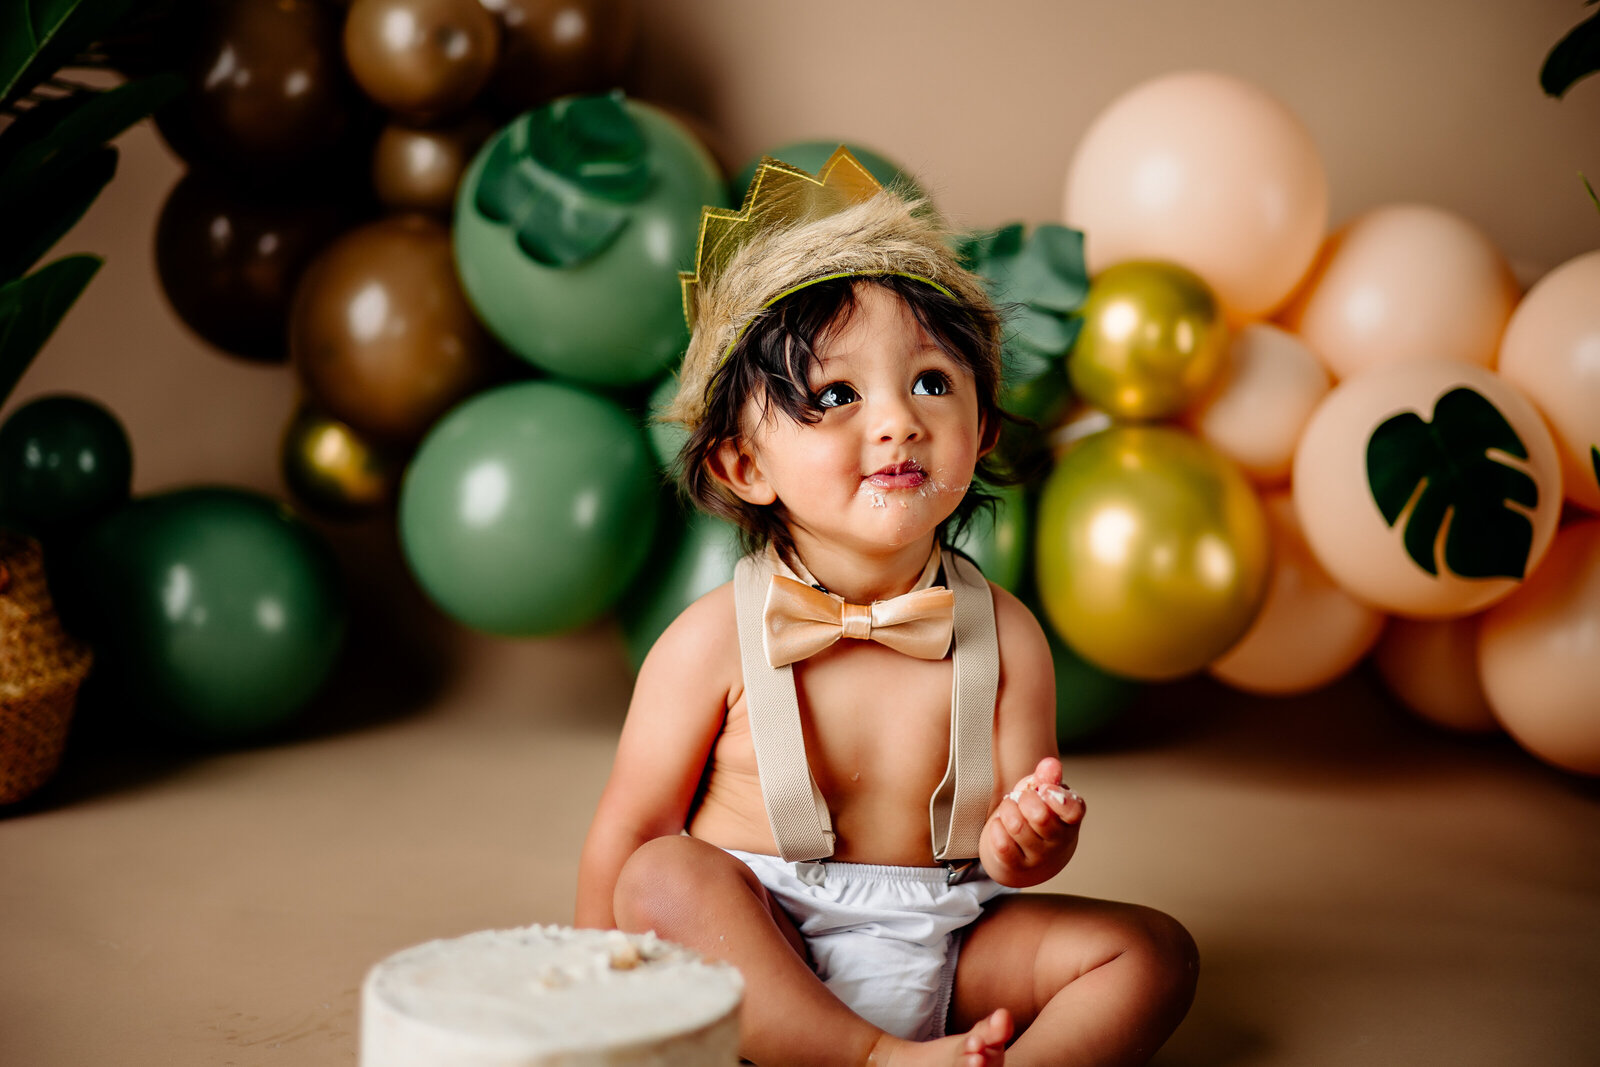 A baby's first taste of cake is captured in this heartwarming cake smash